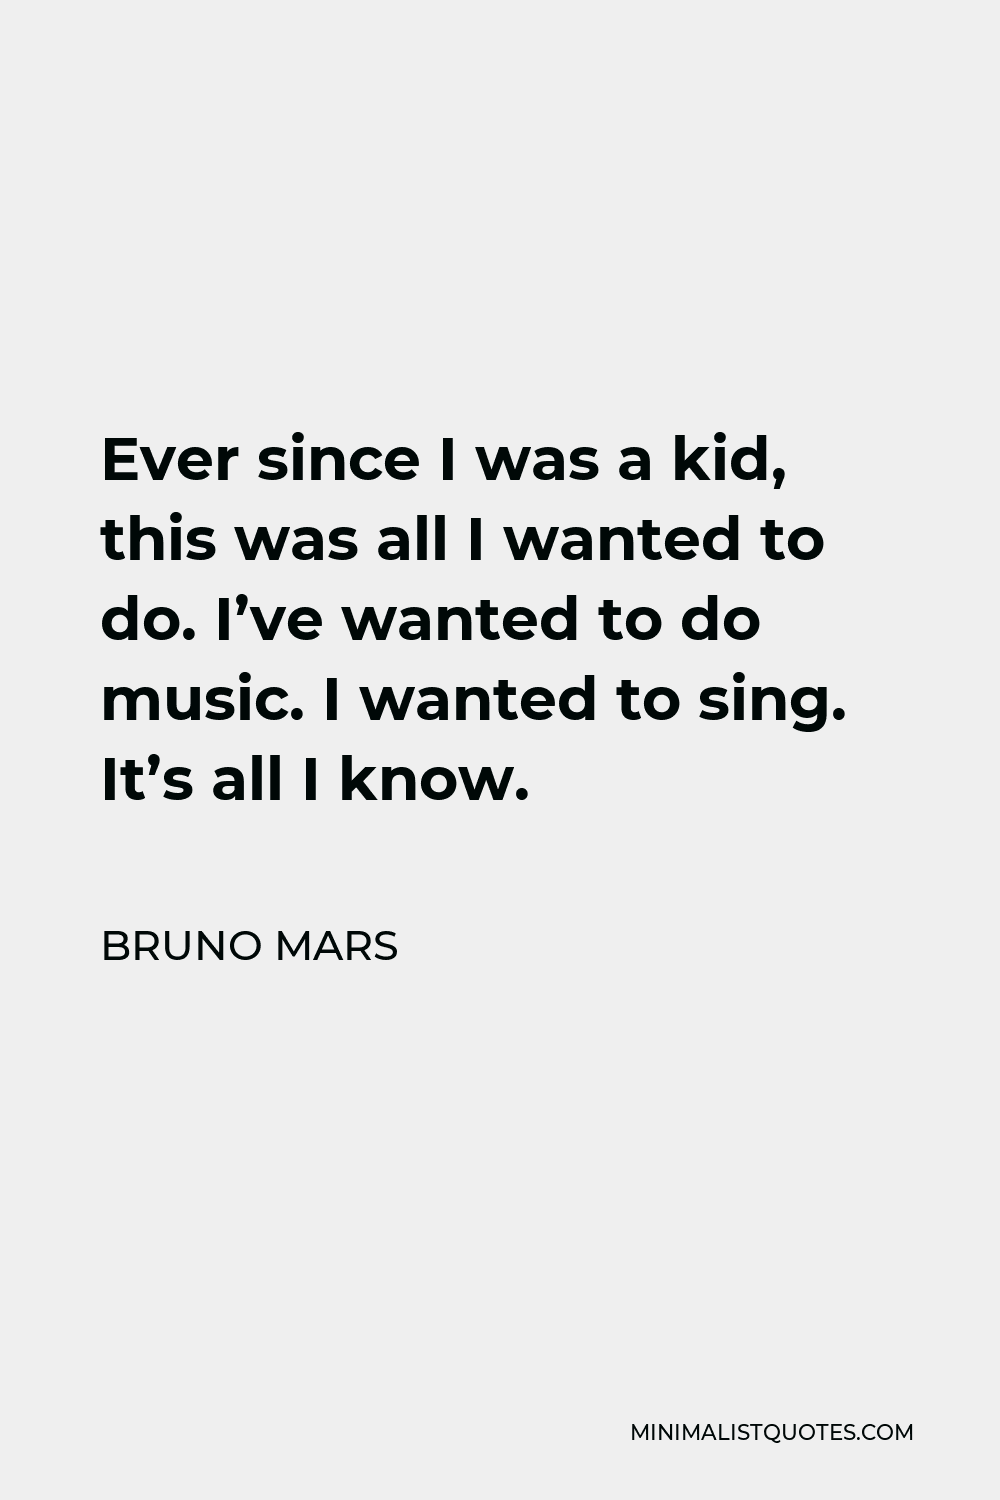 Bruno Mars Quote - Ever since I was a kid, this was all I wanted to do. I’ve wanted to do music. I wanted to sing. It’s all I know.